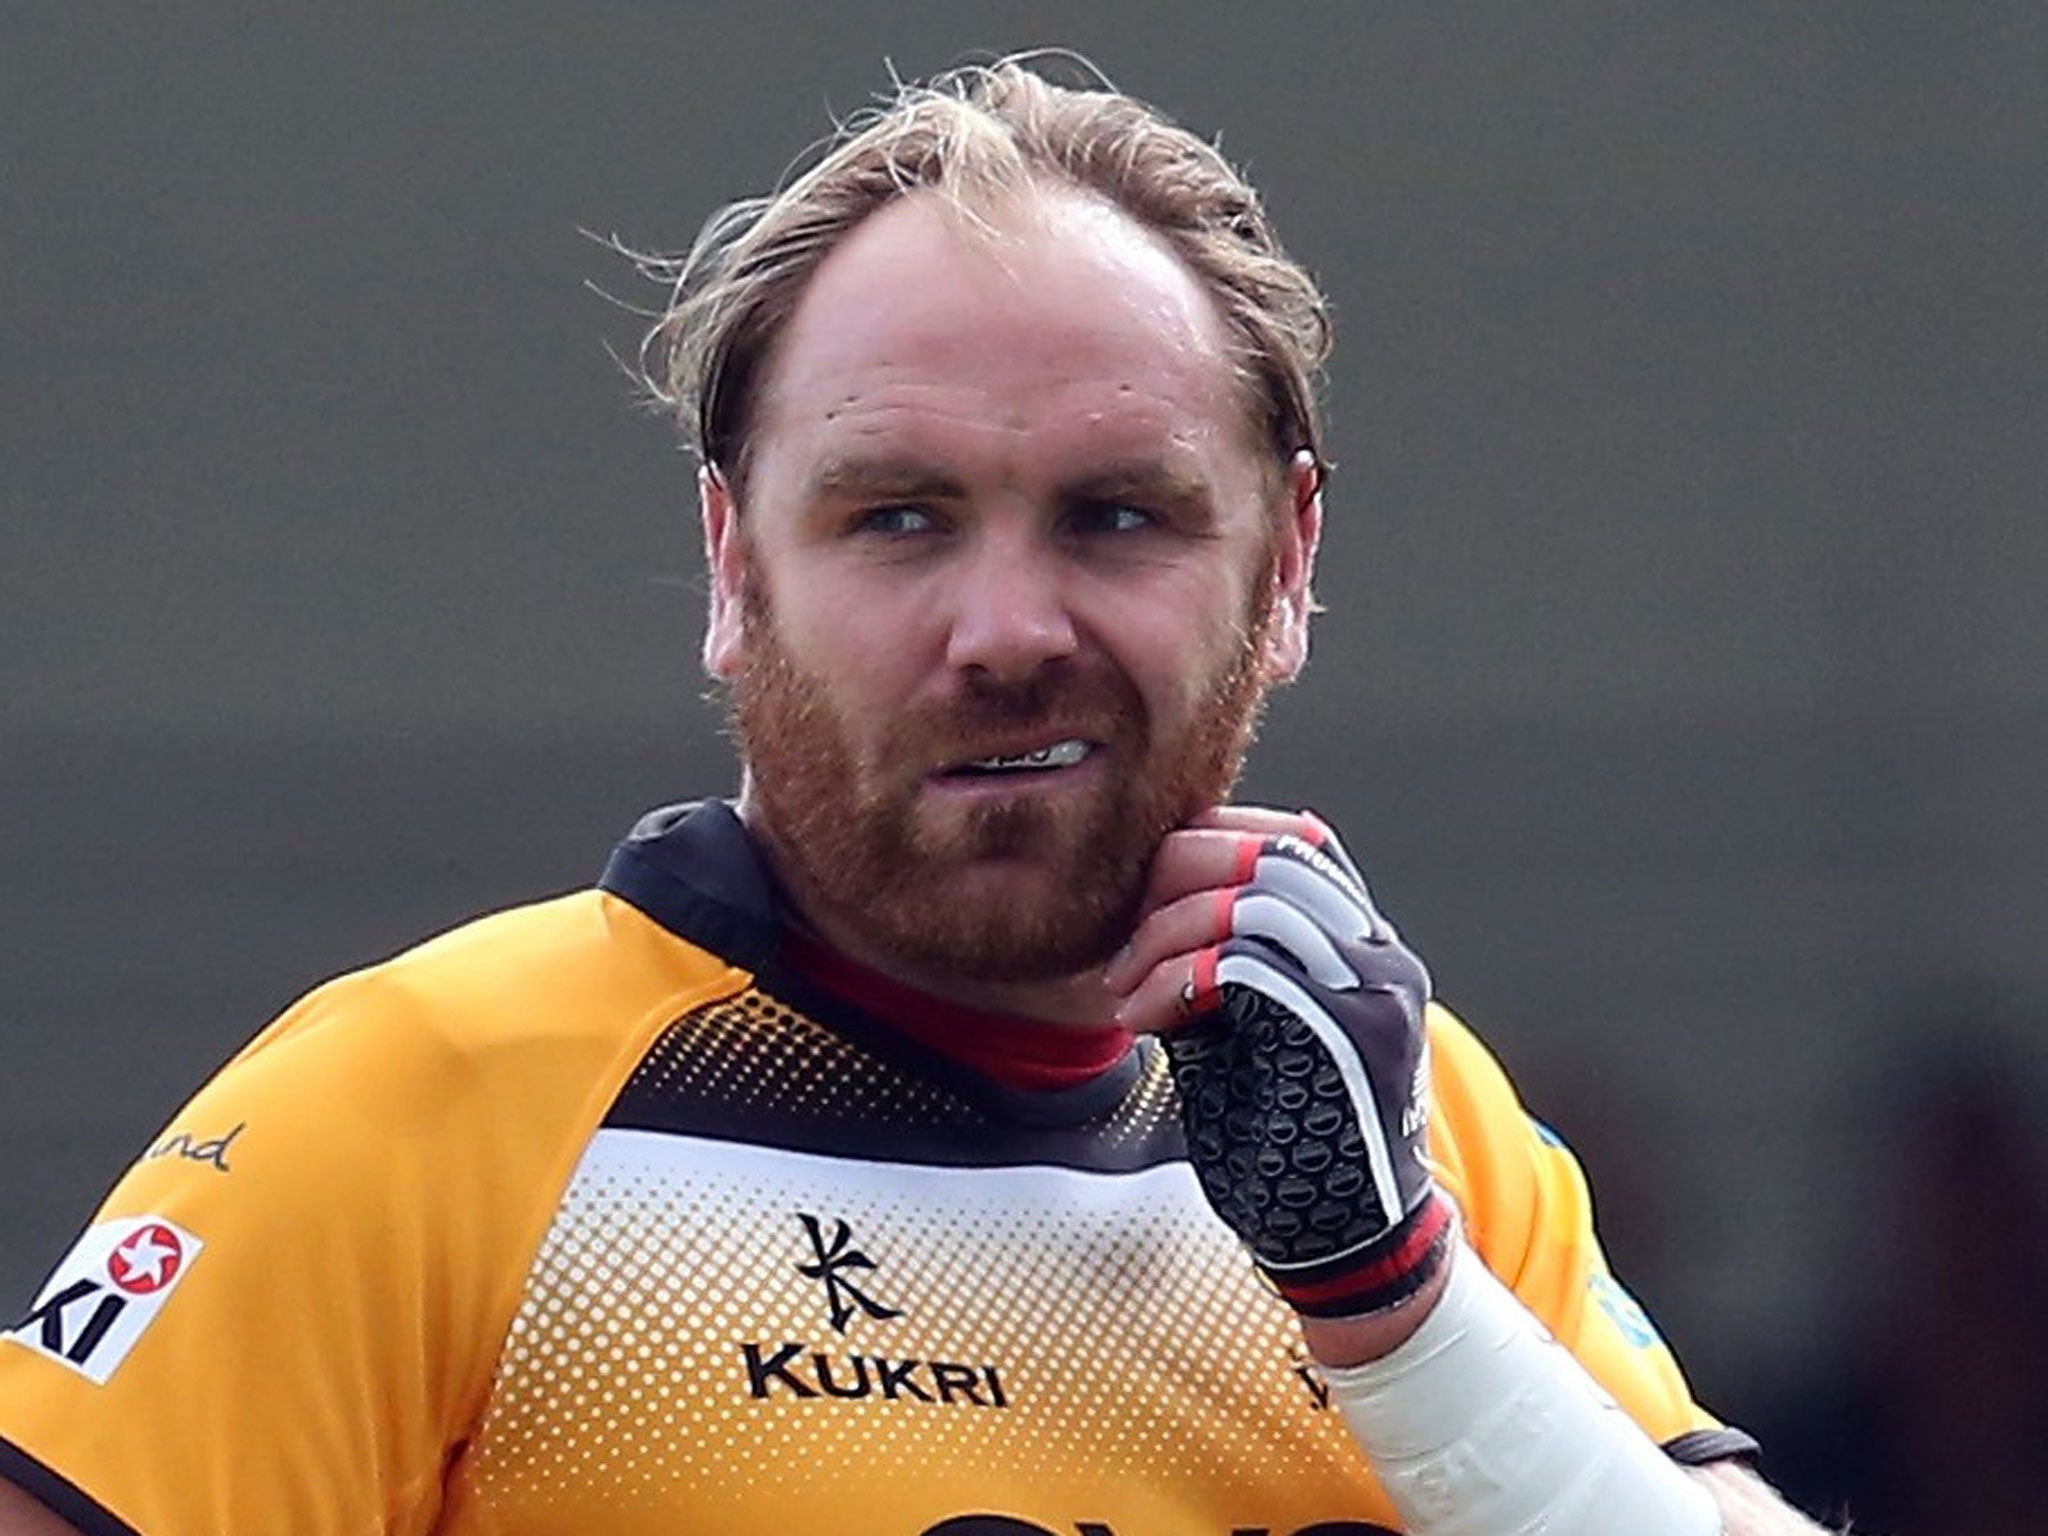 Andy Goode scored 16 points in Wasps' 30-26 defeat at Exeter